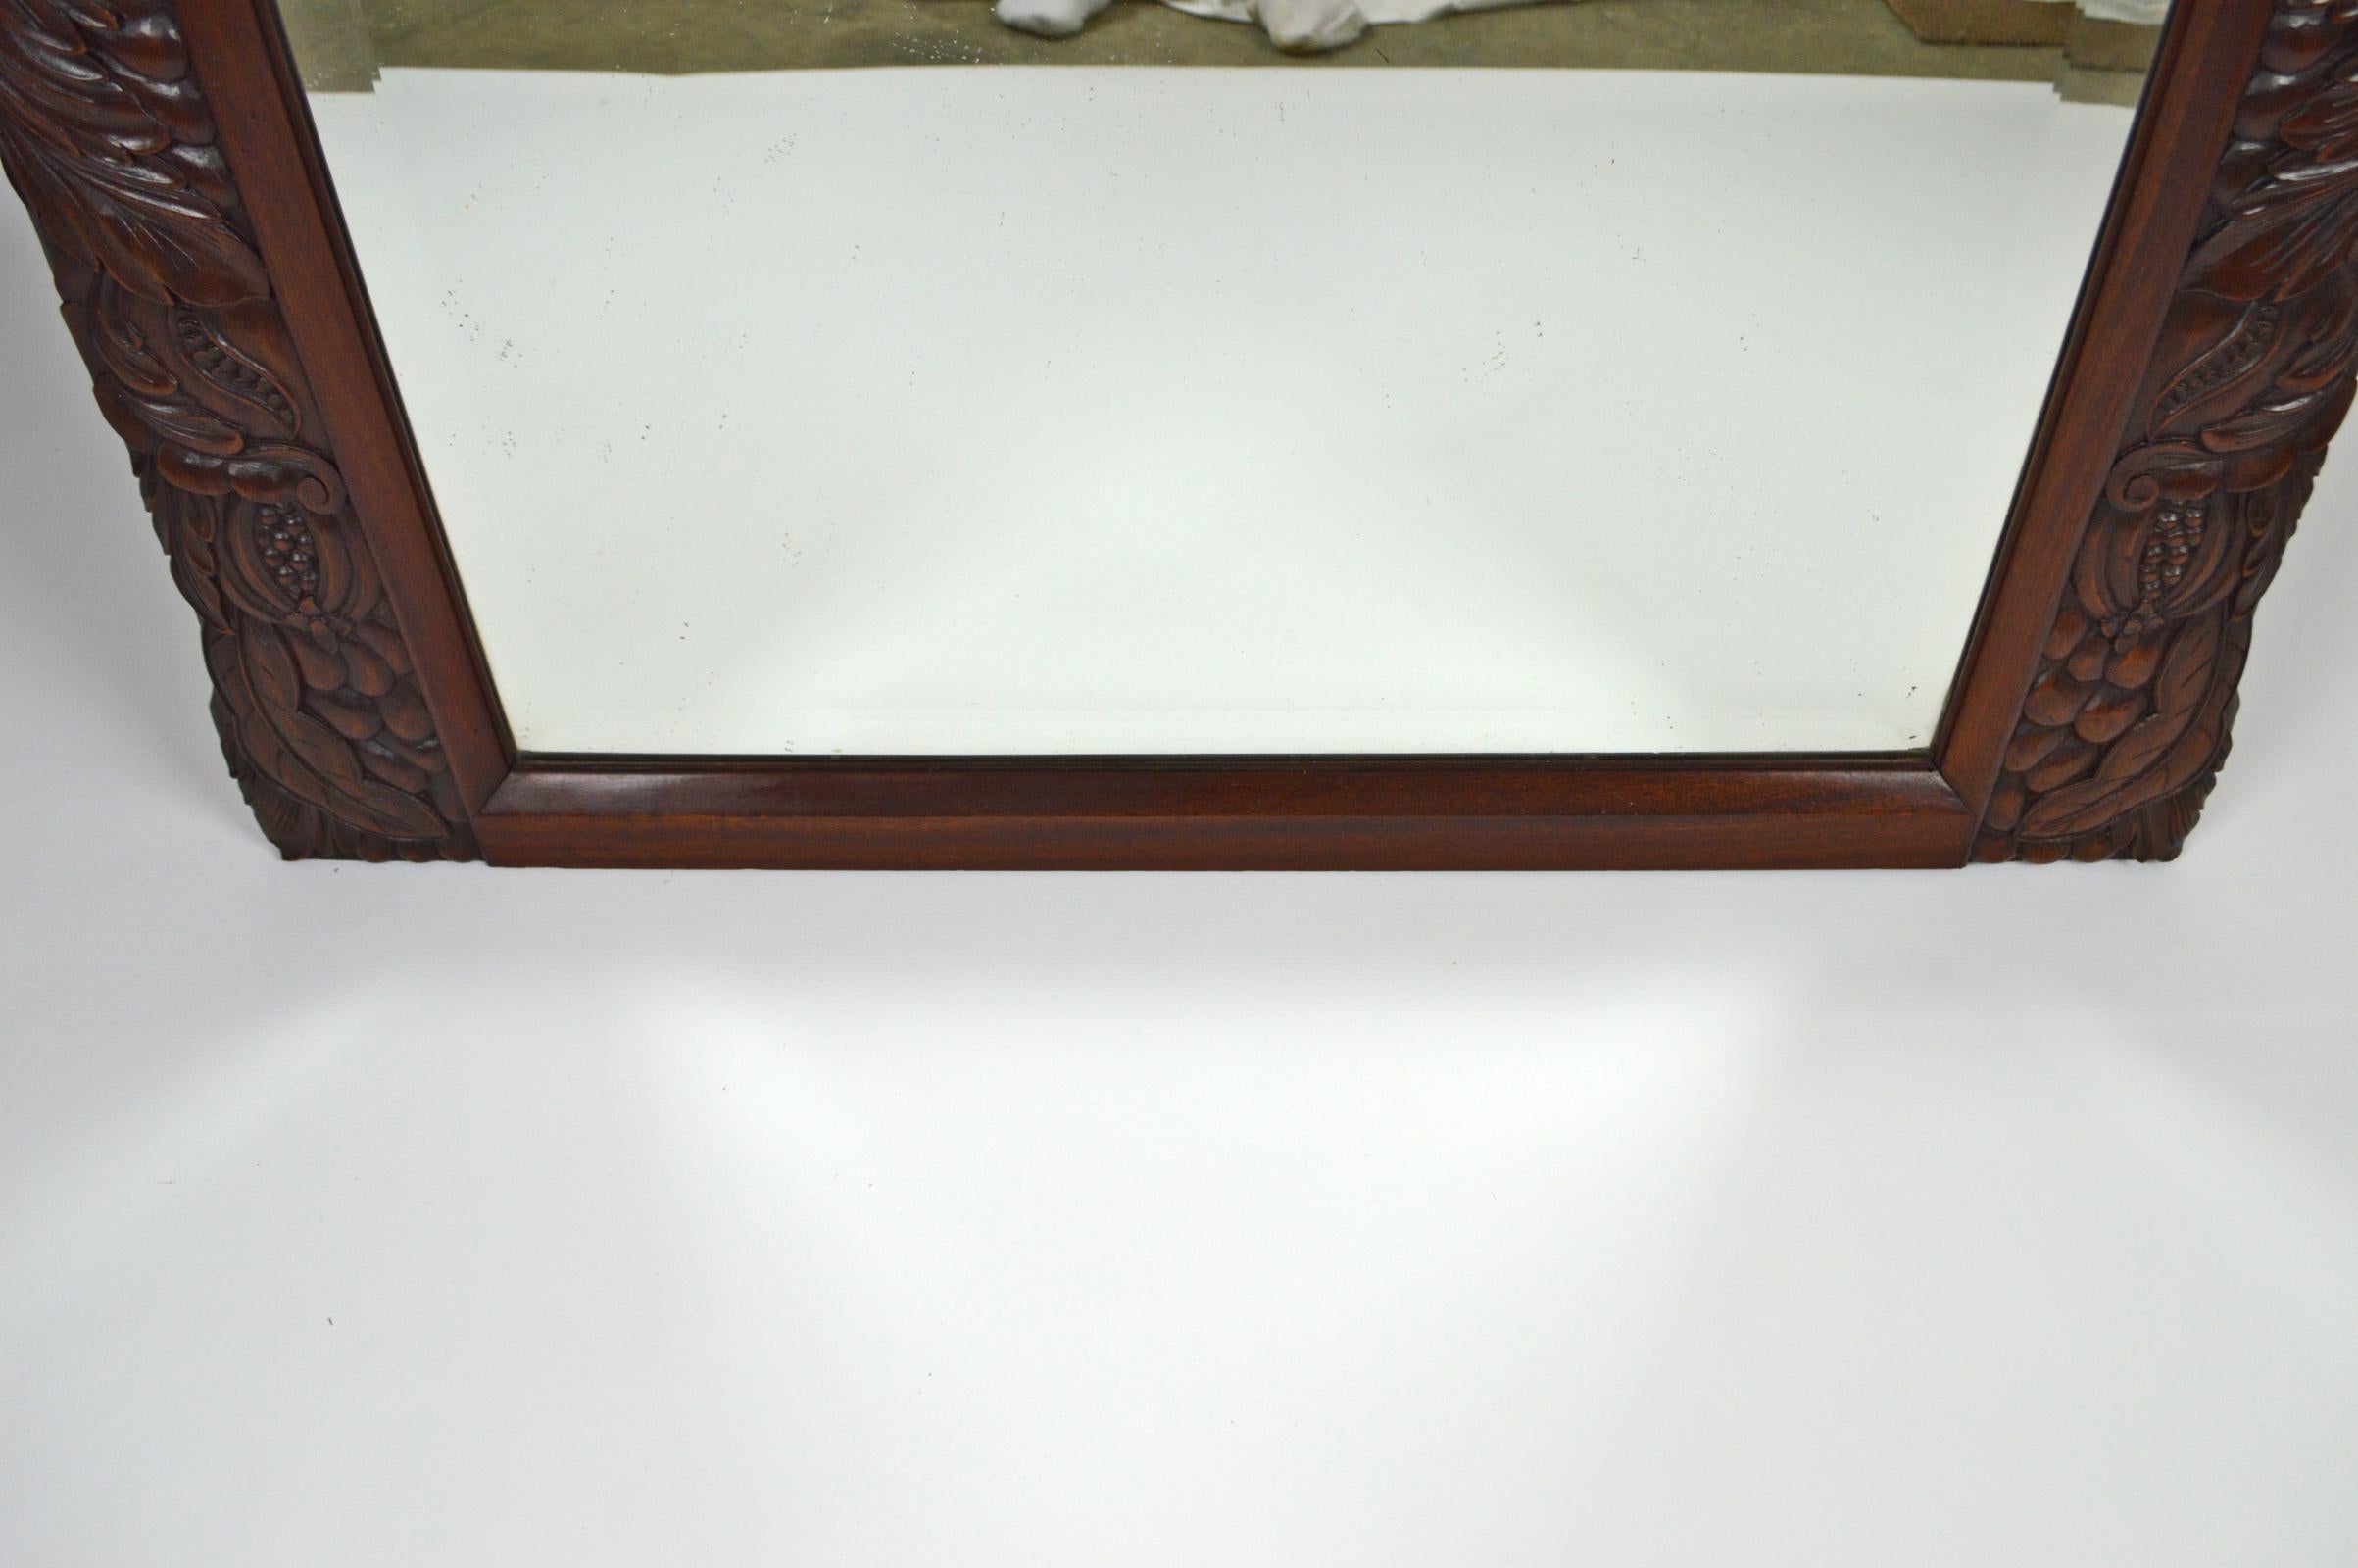 Early 20th Century French Colonial Art Deco Carved Mahogany Fireplace Mantel Mirror, circa 1920